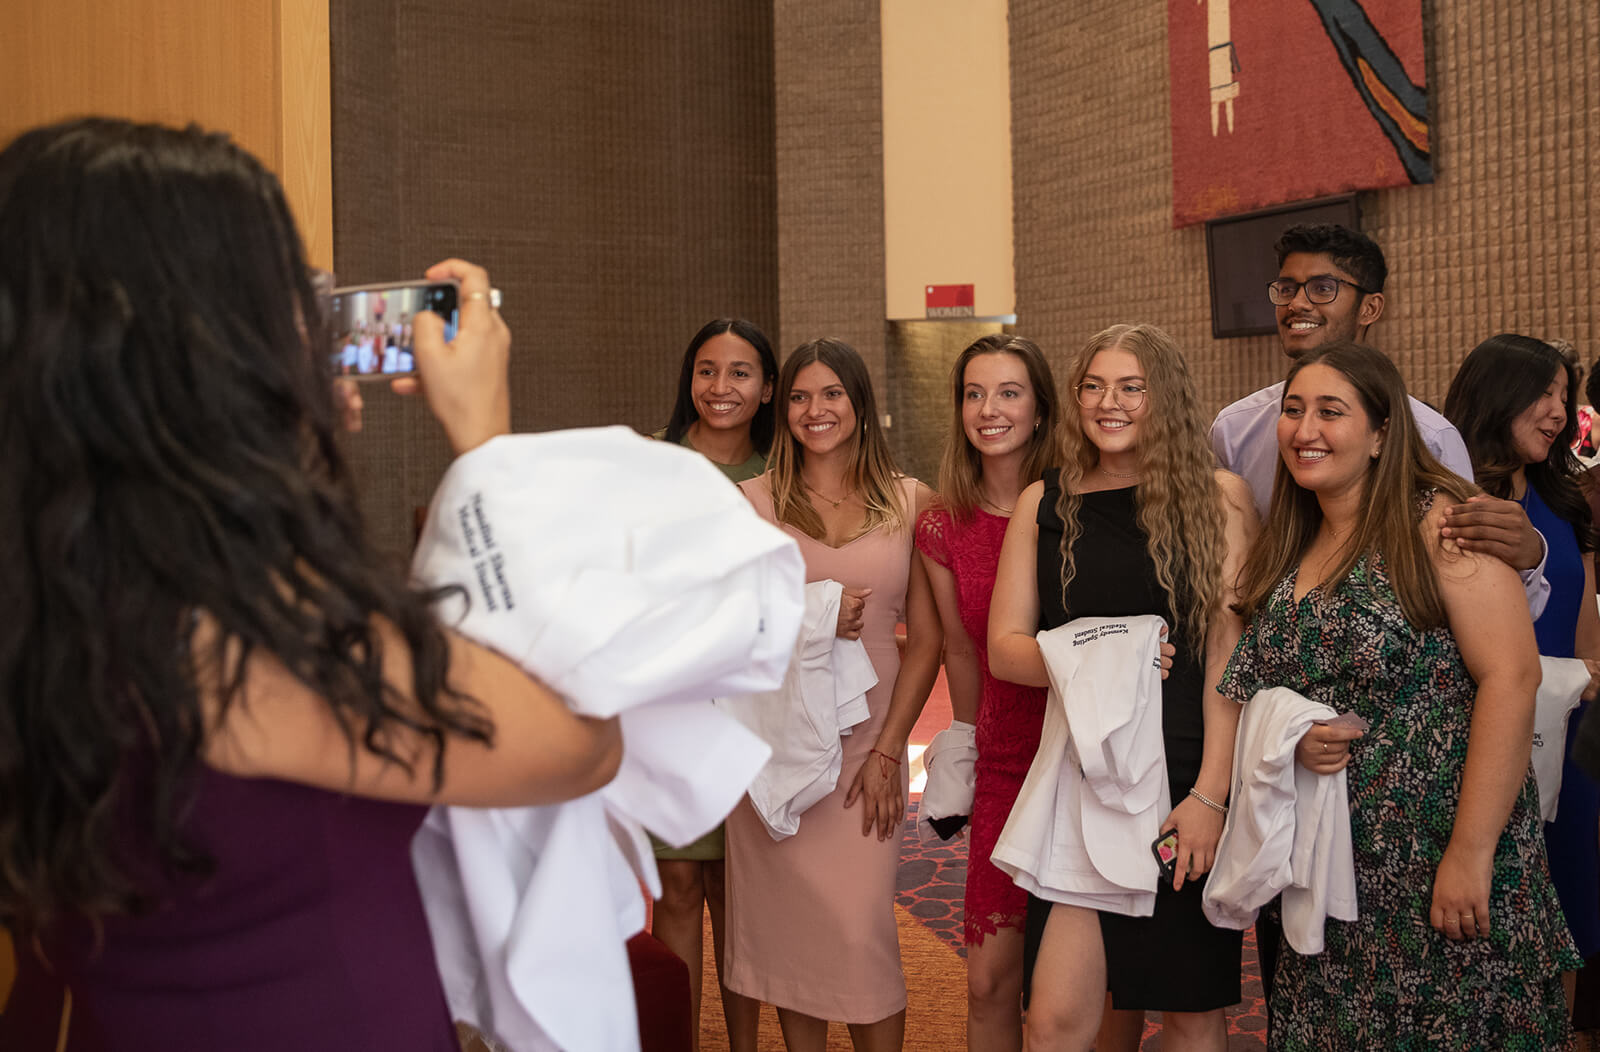 Members of the Class of 2026 pose for a photo at their White Coat Ceremony